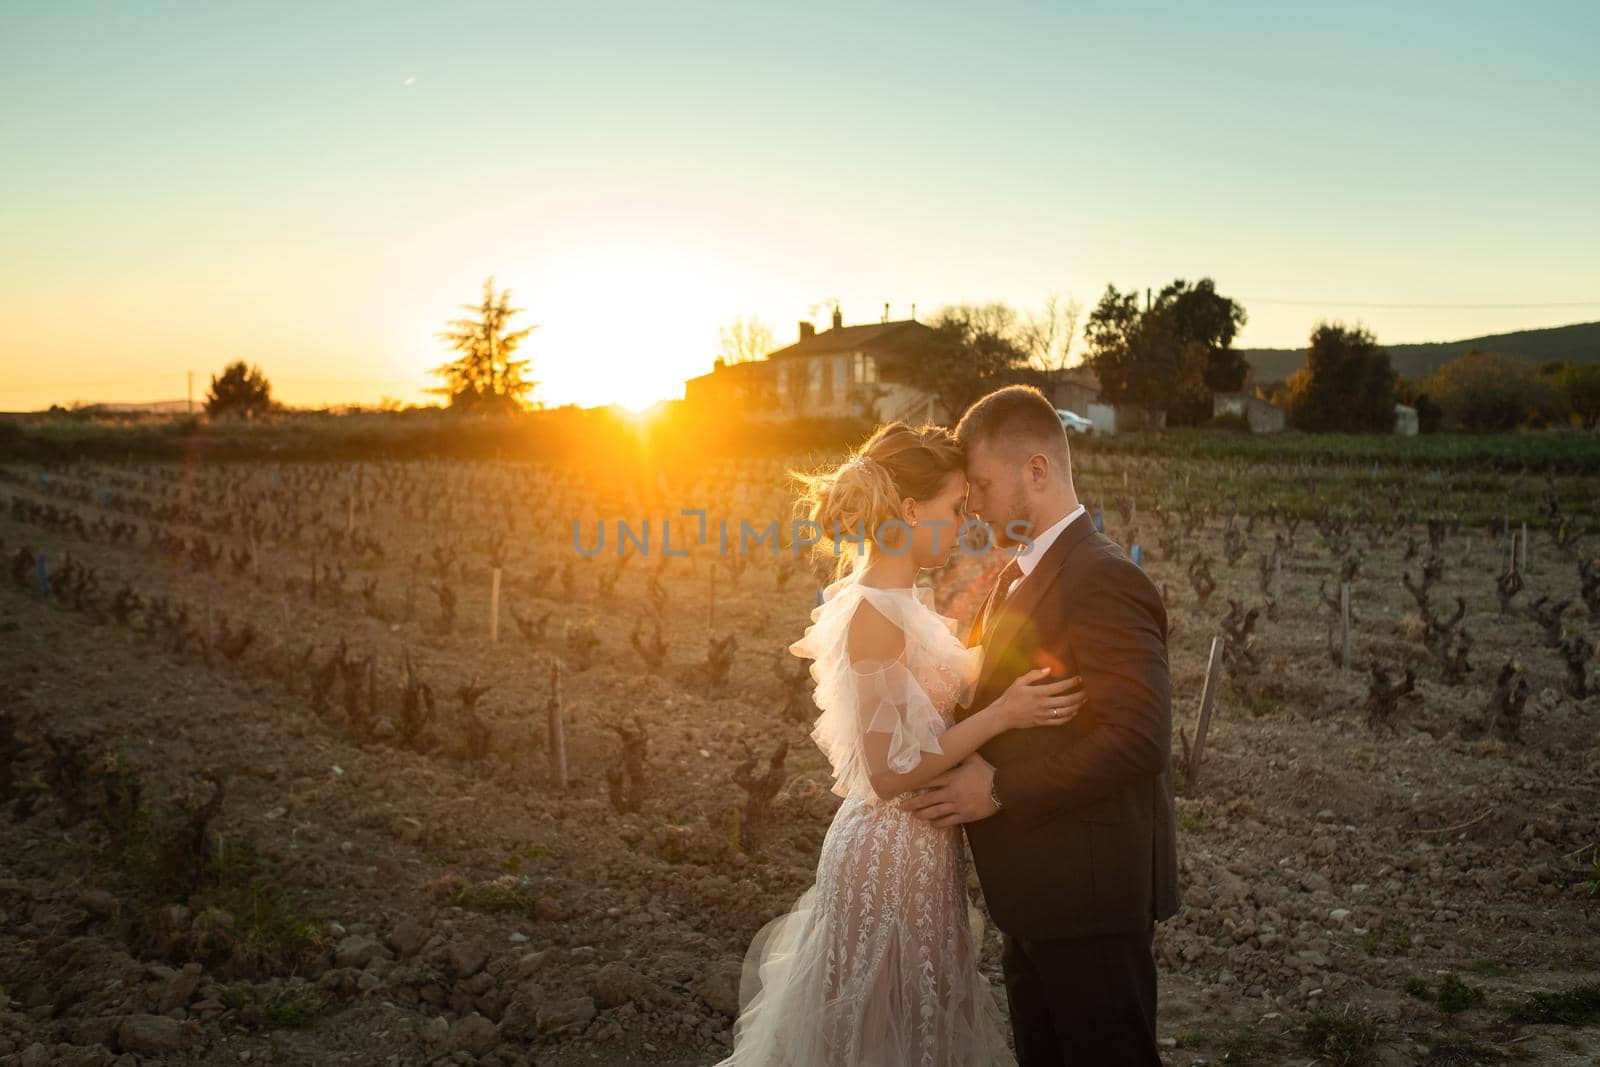 Wedding couple at sunset in France.Wedding in Provence.Wedding photo shoot in France.